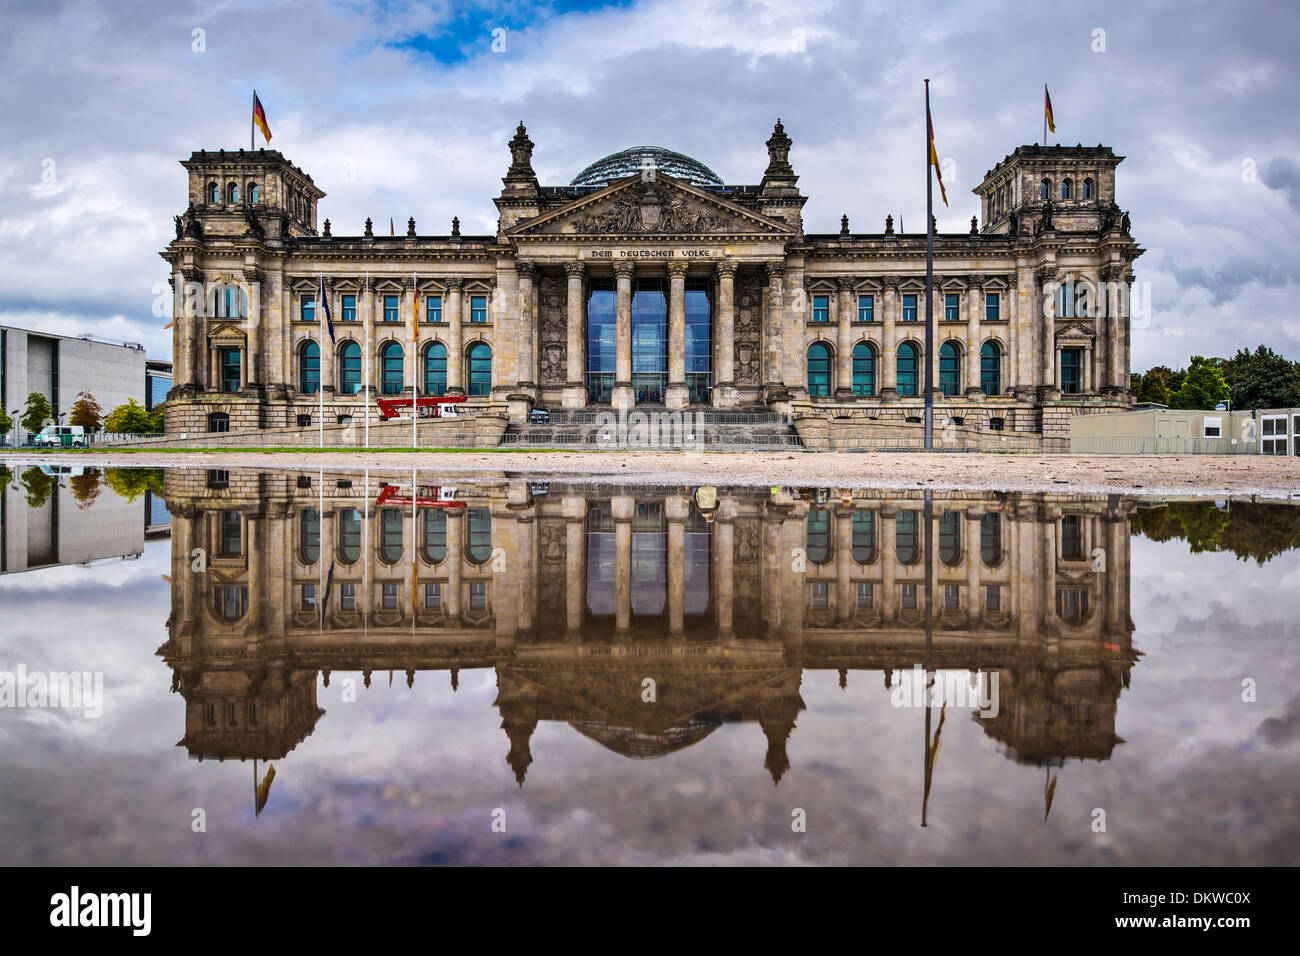 German Parliament Building Reichstag in Berlin, Germany. Stock Photo